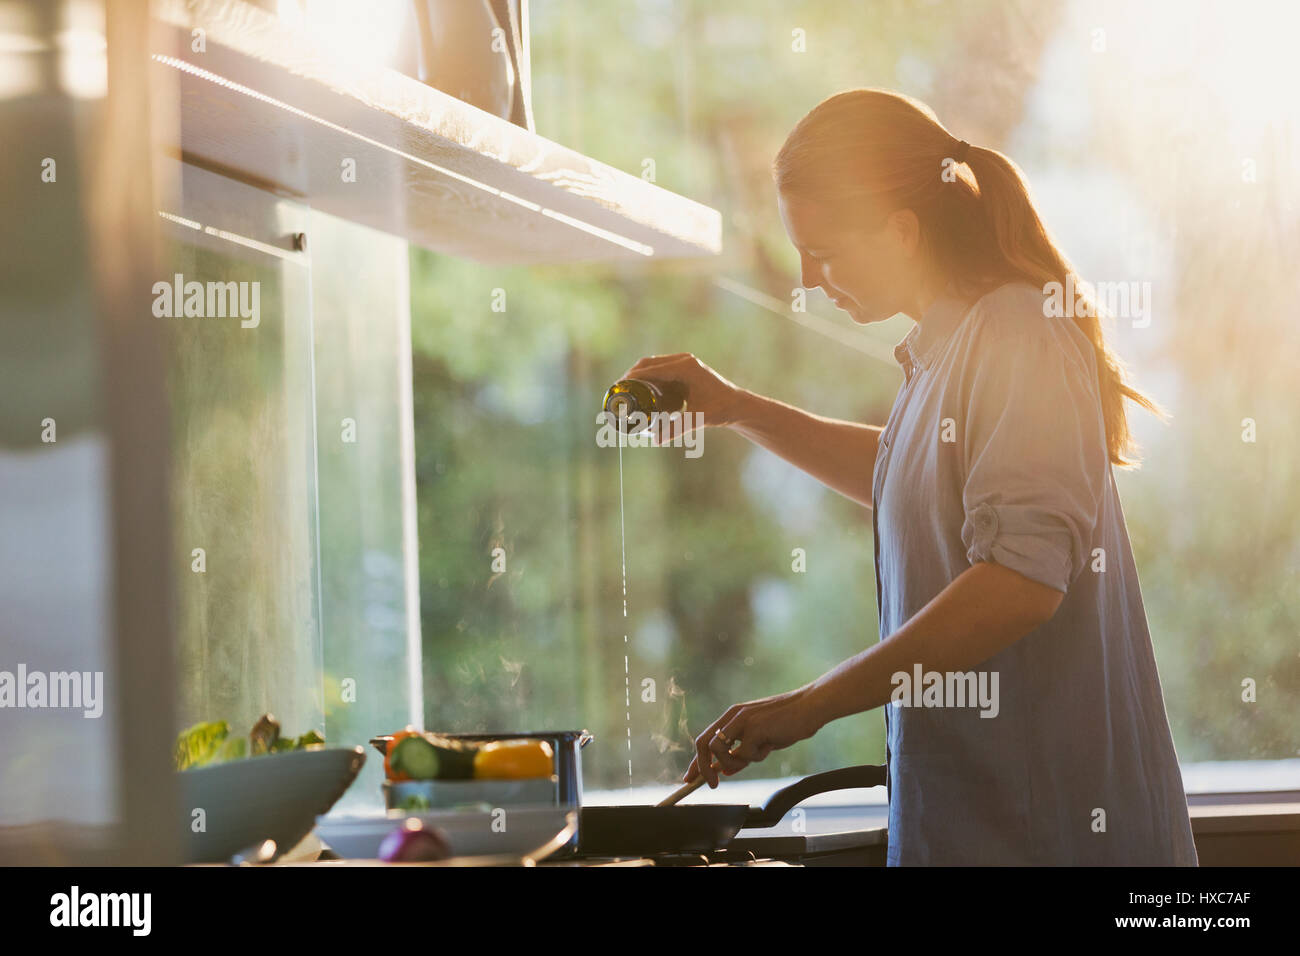 Woman pouring oil into pan on stove in kitchen Stock Photo